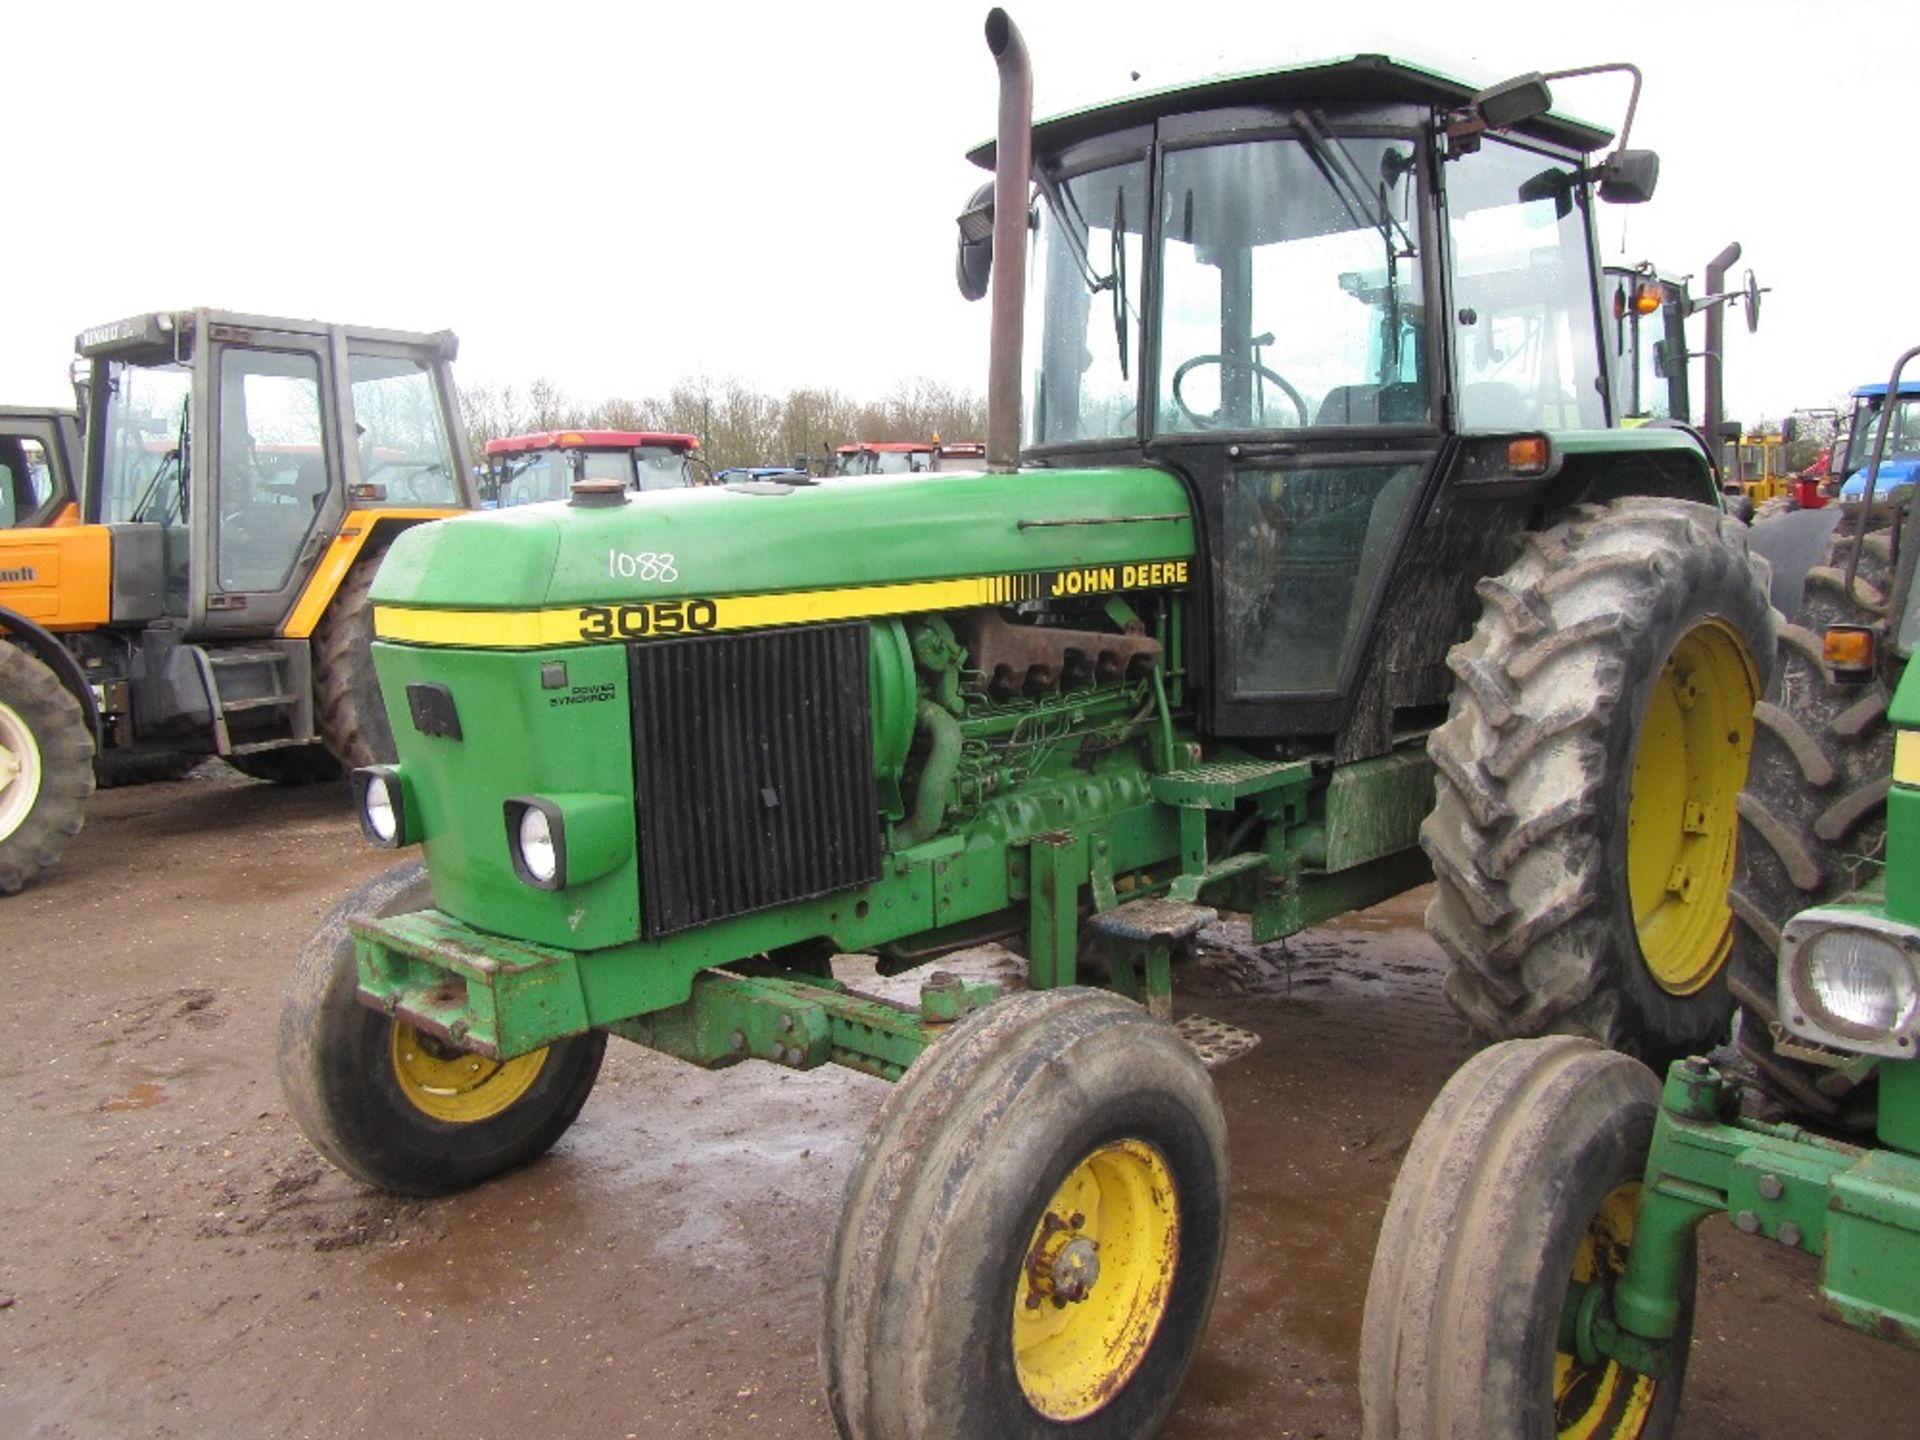 John Deere 3050 2wd Tractor. c/w V5. One owner from new Reg. No. F439 HTA